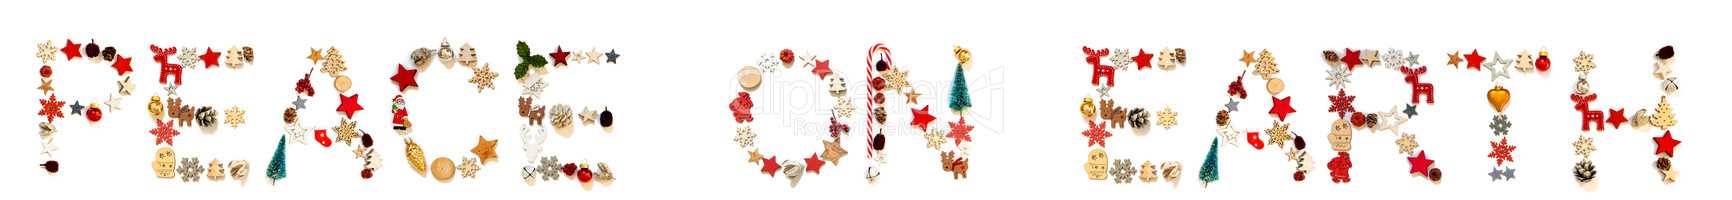 Colorful Christmas Decoration Letter Building Word Peace On Earth